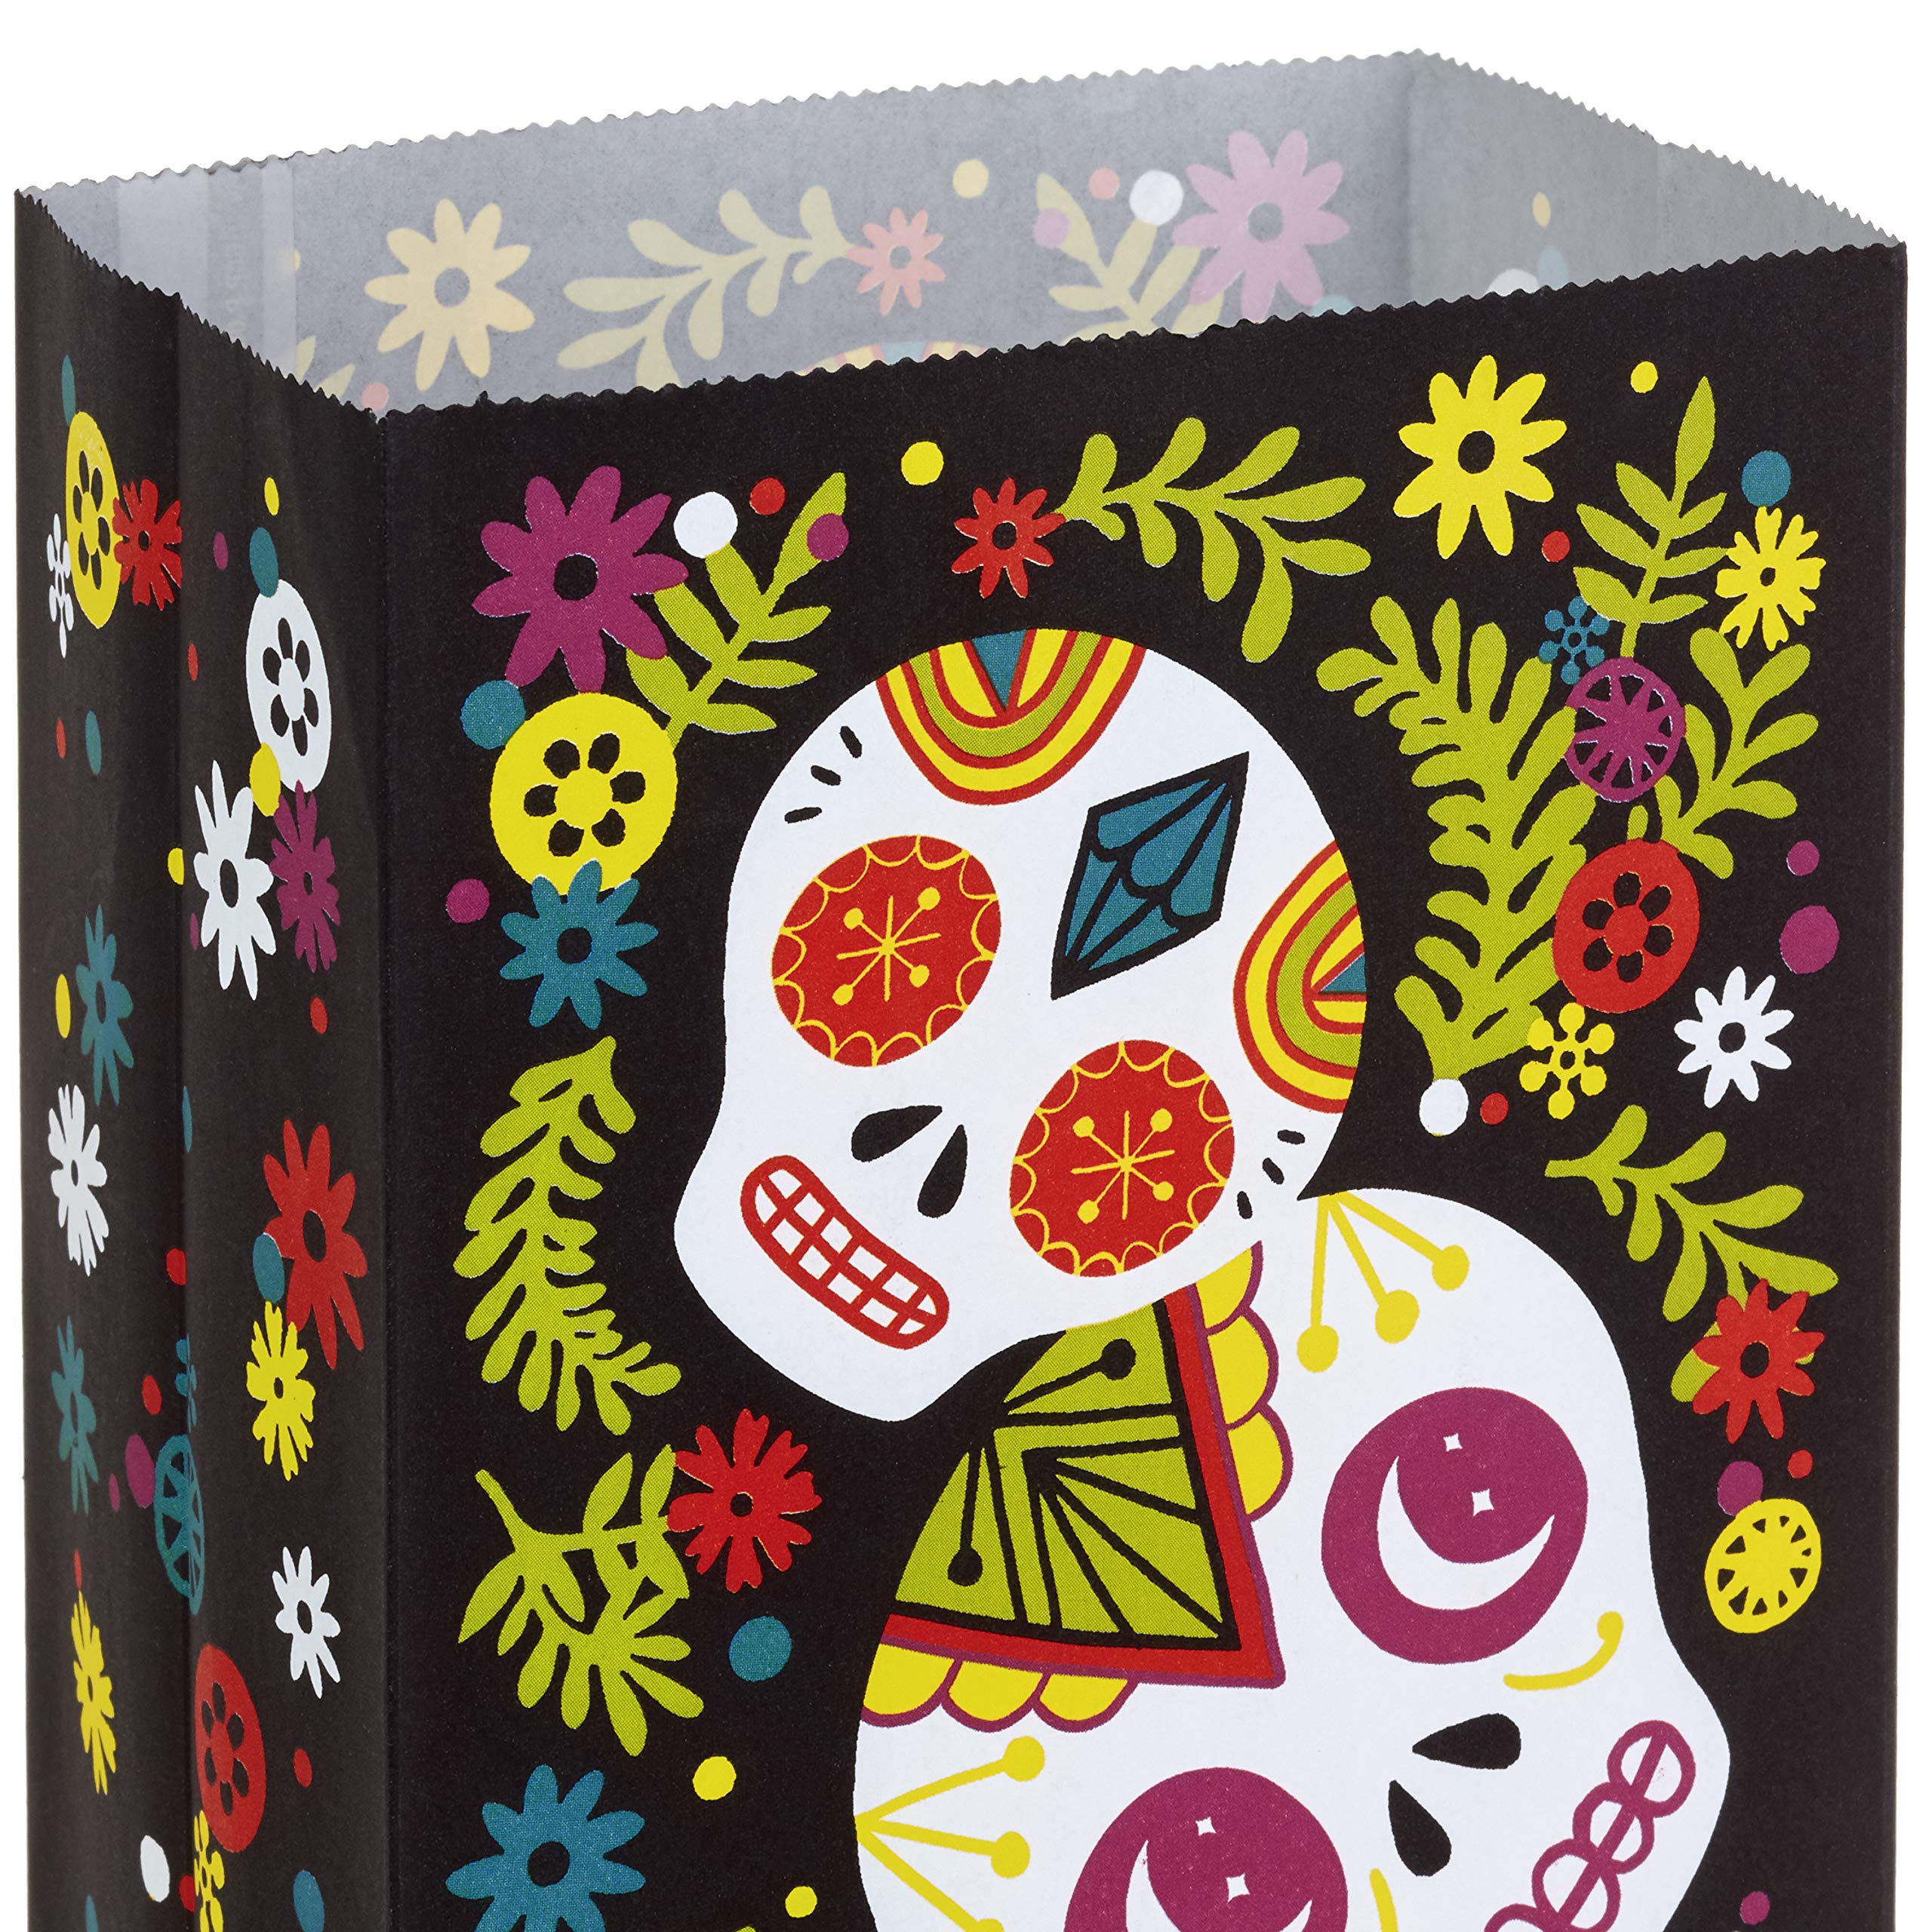 Hallmark Day of the Dead Party Favor and Wrapped Treat Bags (15 Ct.) for Halloween, Día de los Muertos, Class Parties, Care Packages and More